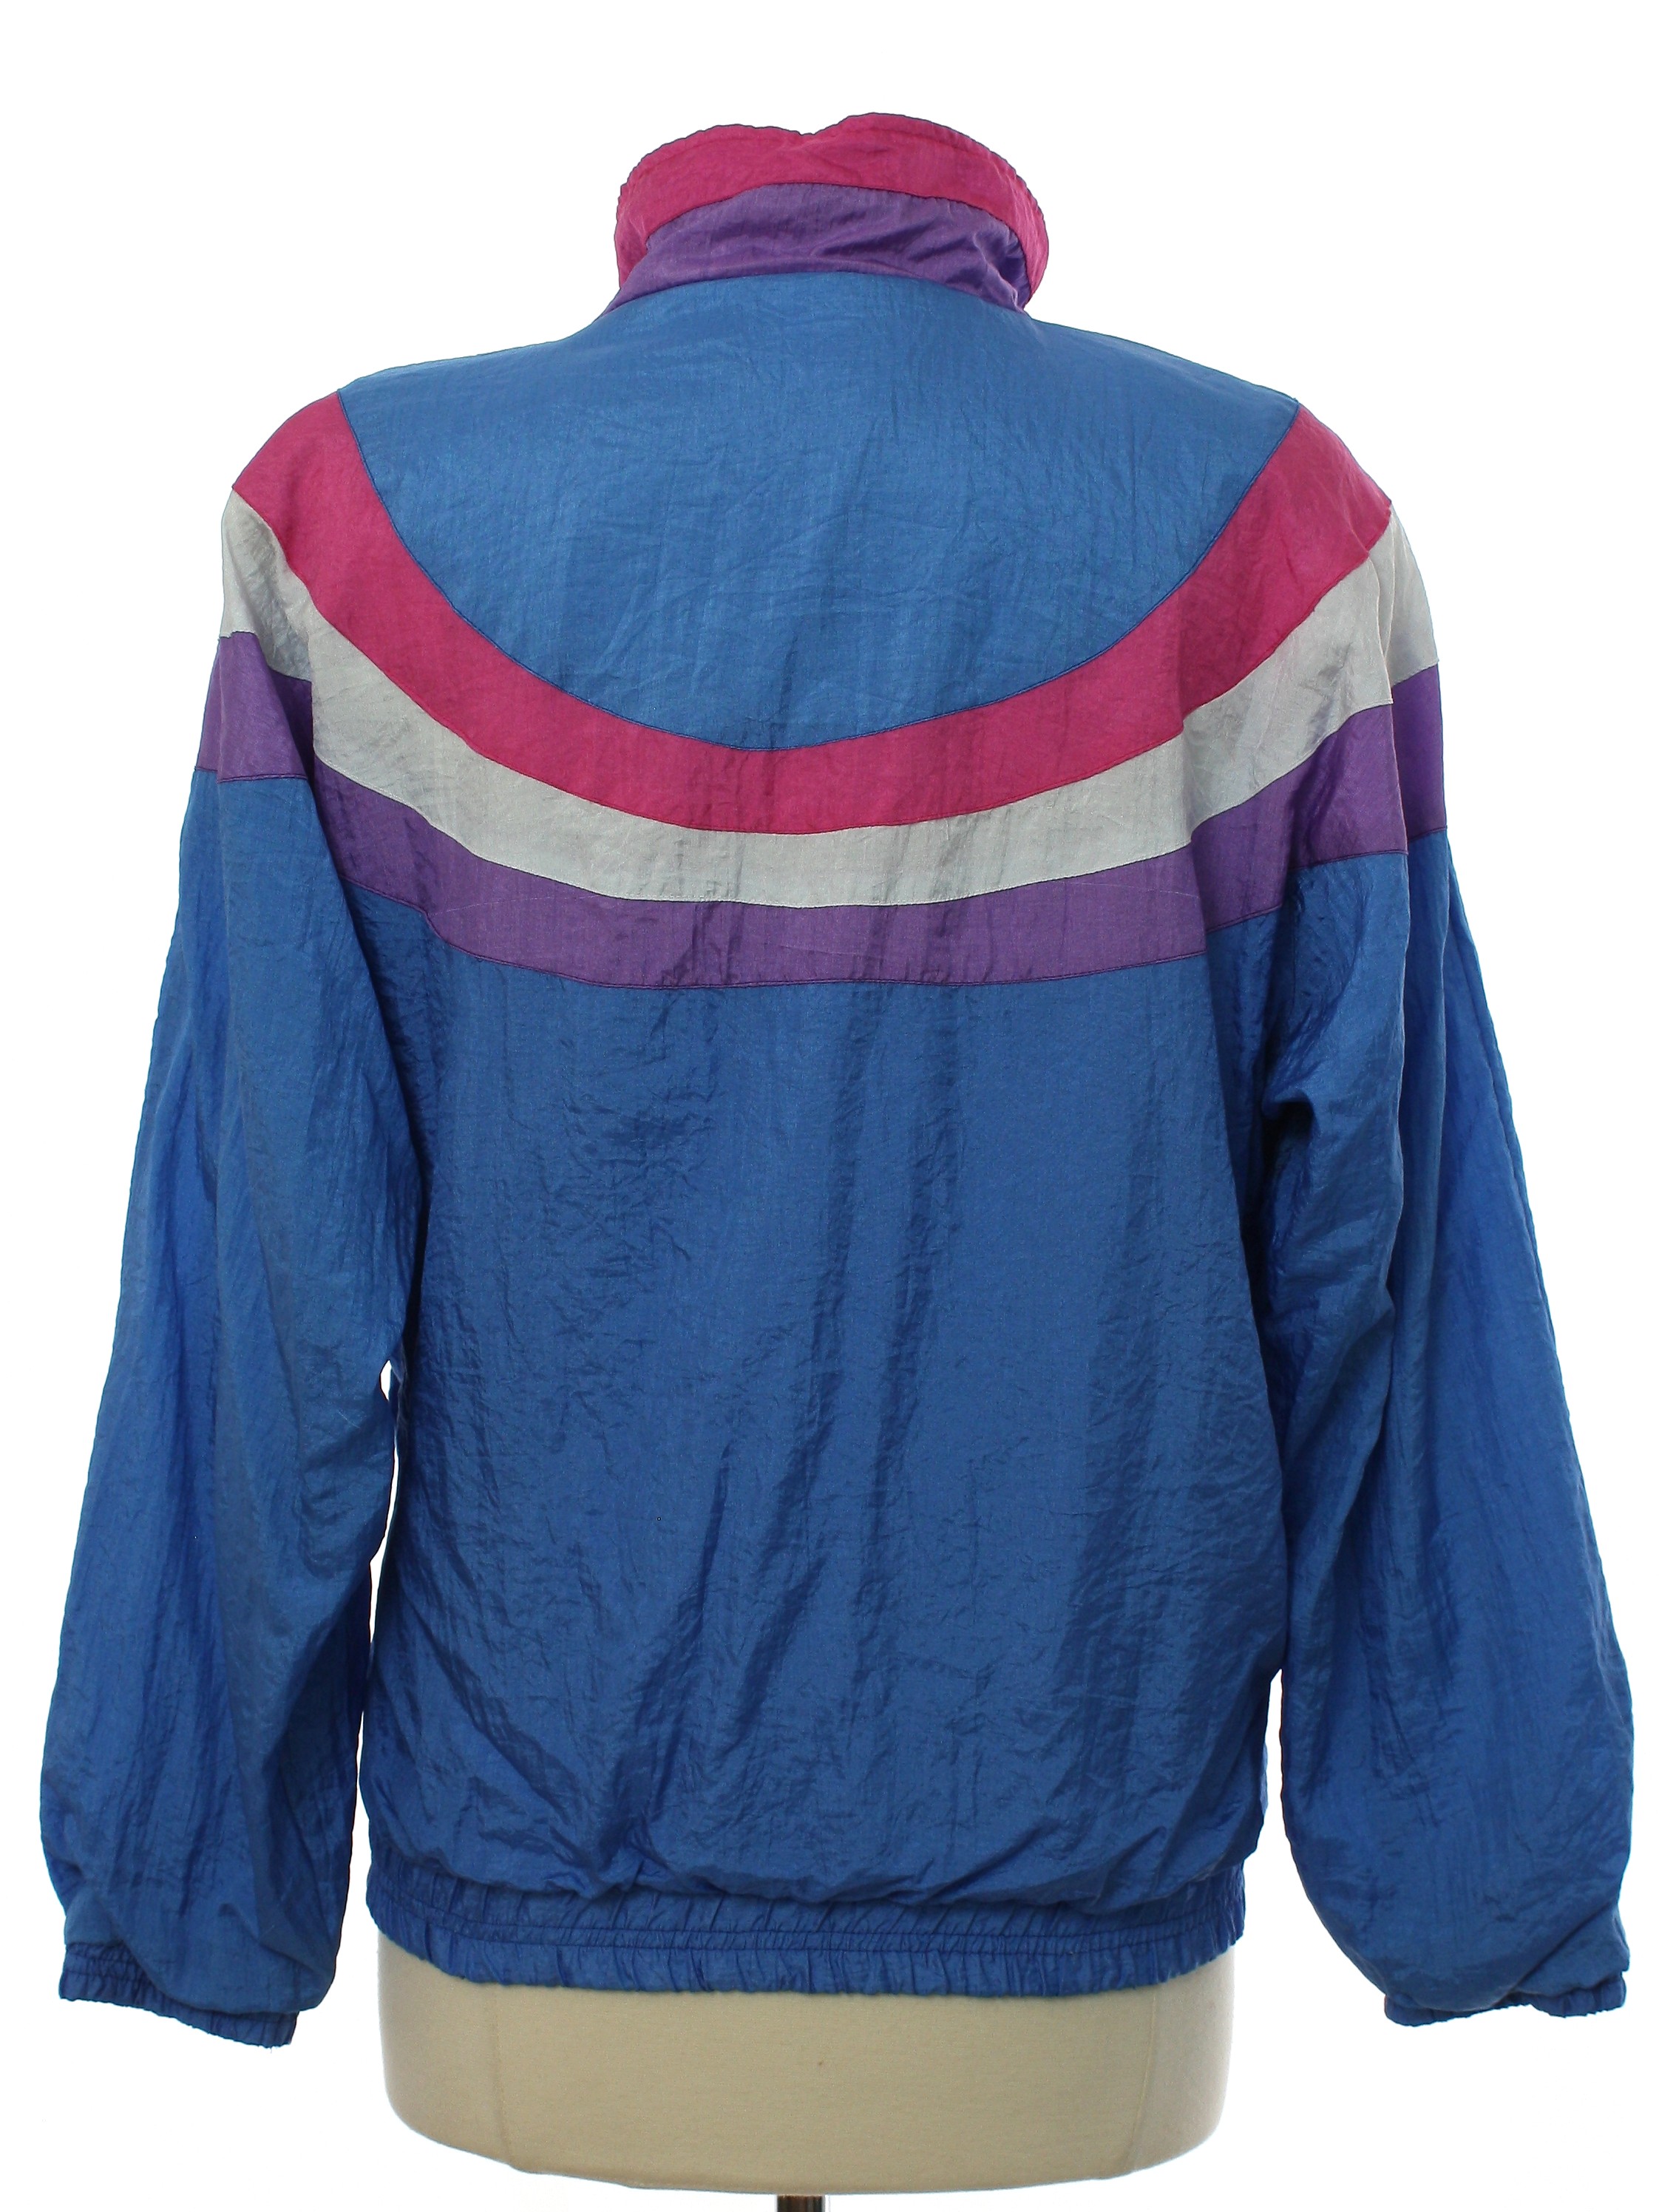 Pro Spirit 80's Vintage Jacket: 80s -Pro Spirit- Womens light blue  background nylon shell banded elastic cuffs dolman longsleeve zip front  windbreaker zip jacket. Rounded stripes in shades of magenta, white, and